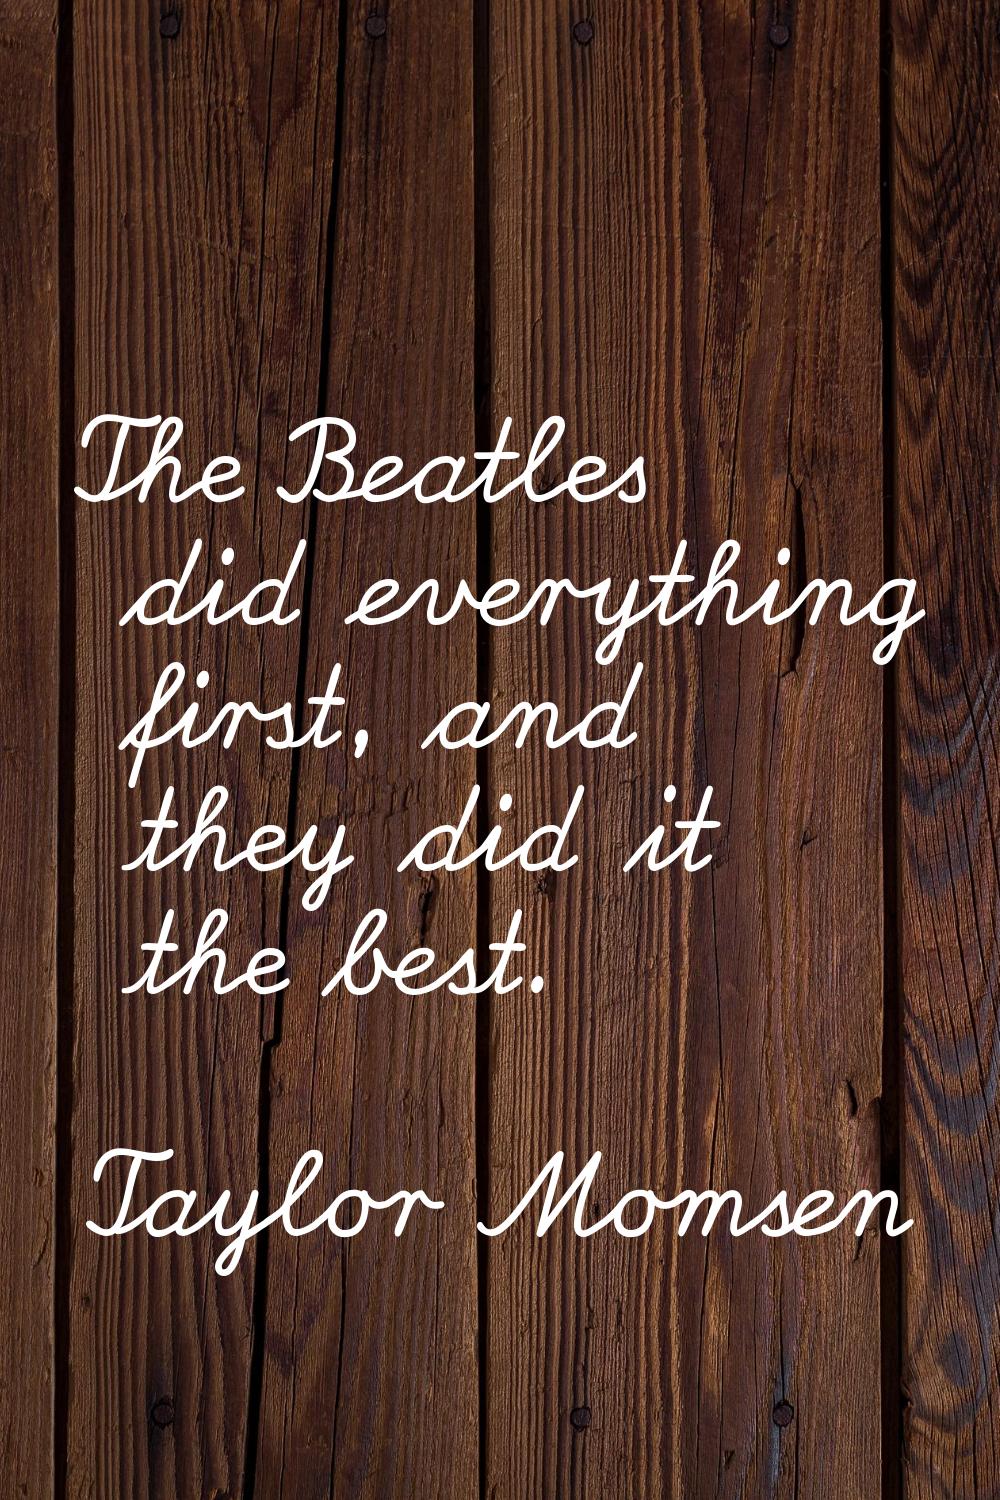 The Beatles did everything first, and they did it the best.